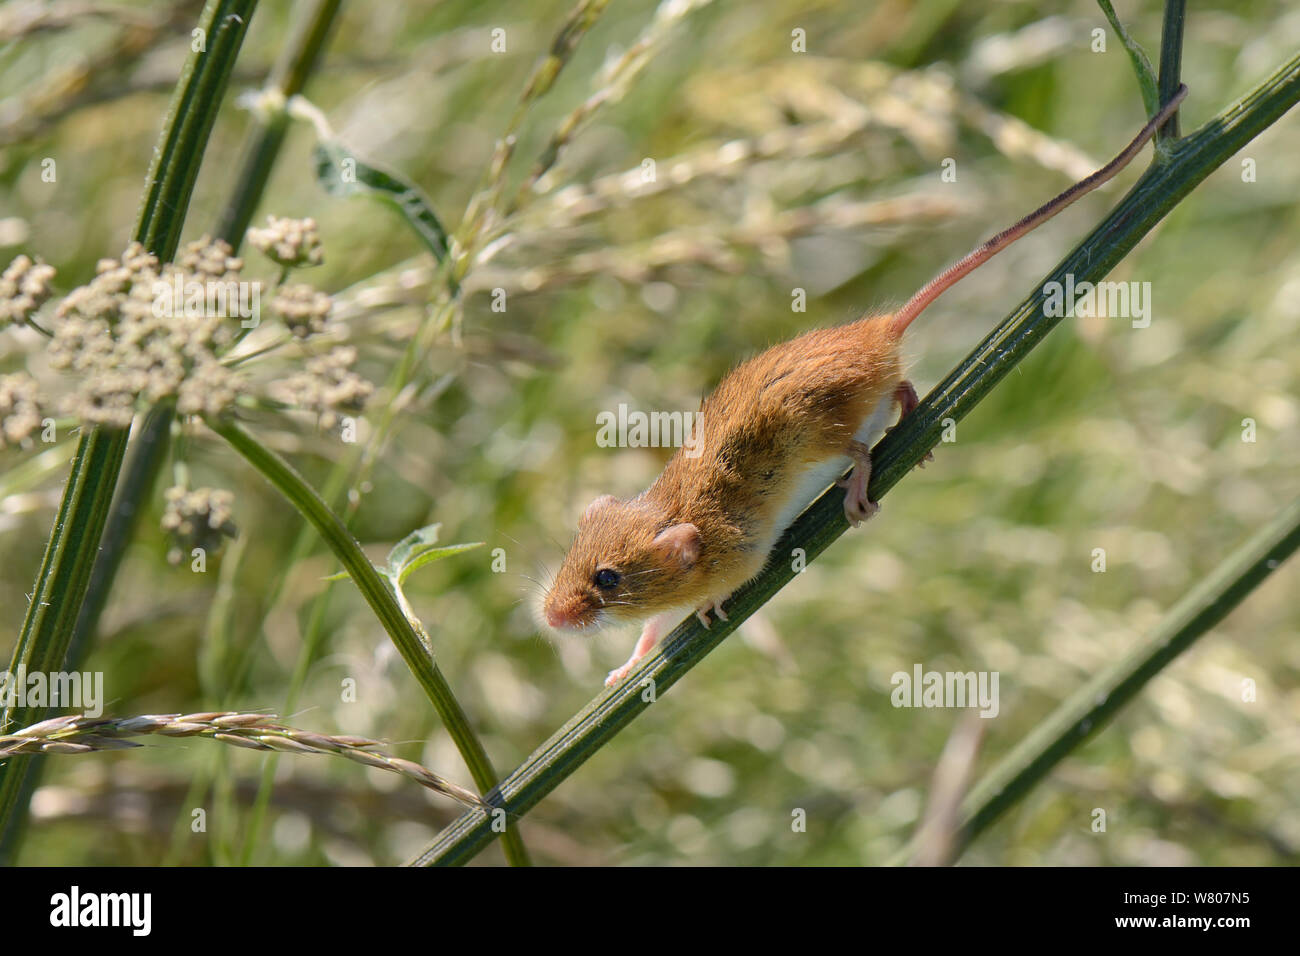 Harvest mouse (Micromys minutus) using its gripping tail to aid its descent of a Common hogweed (Heracleum sphondylium) stem after release into the wild, Moulton, Northampton, UK, June. Stock Photo